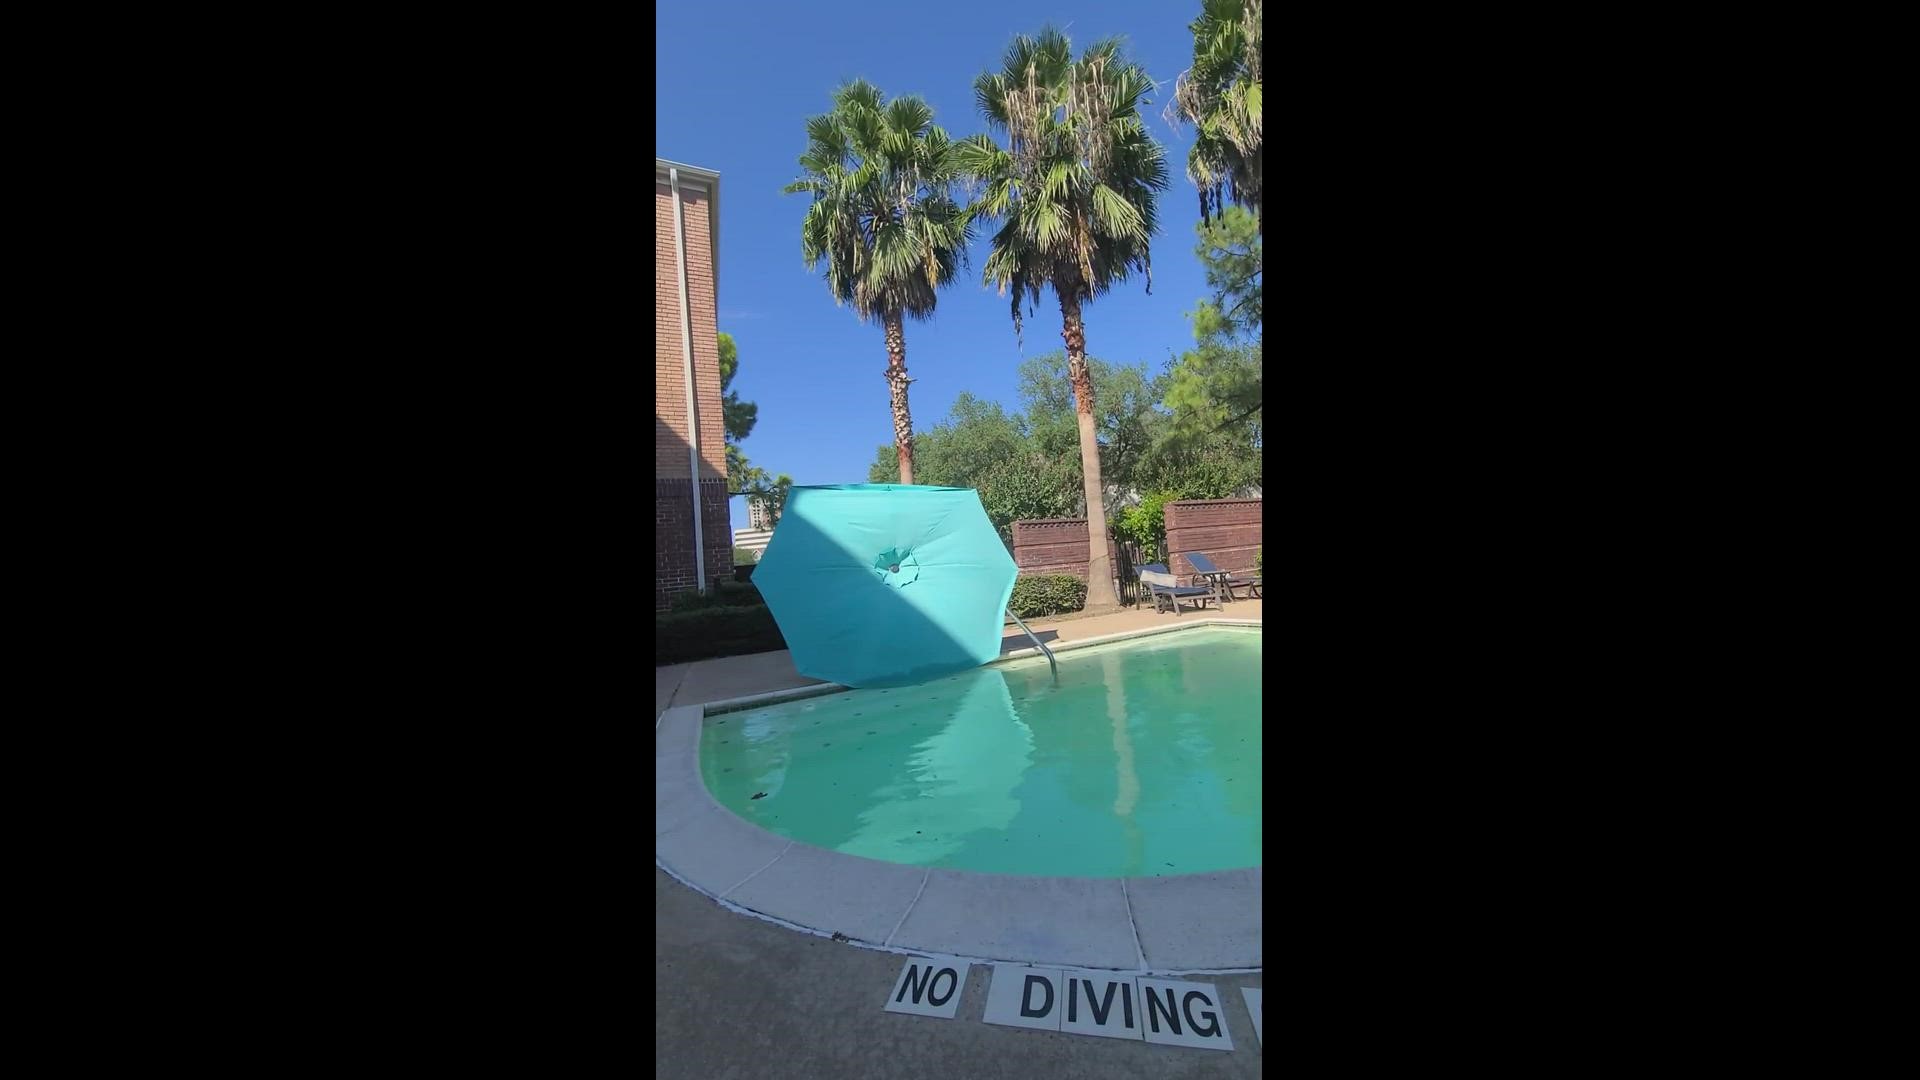 Wind Blowing Very Strong Near Tangle Wood West Texas This Afternoon At the swimming pool ☀️
Credit: Brandon Bockman